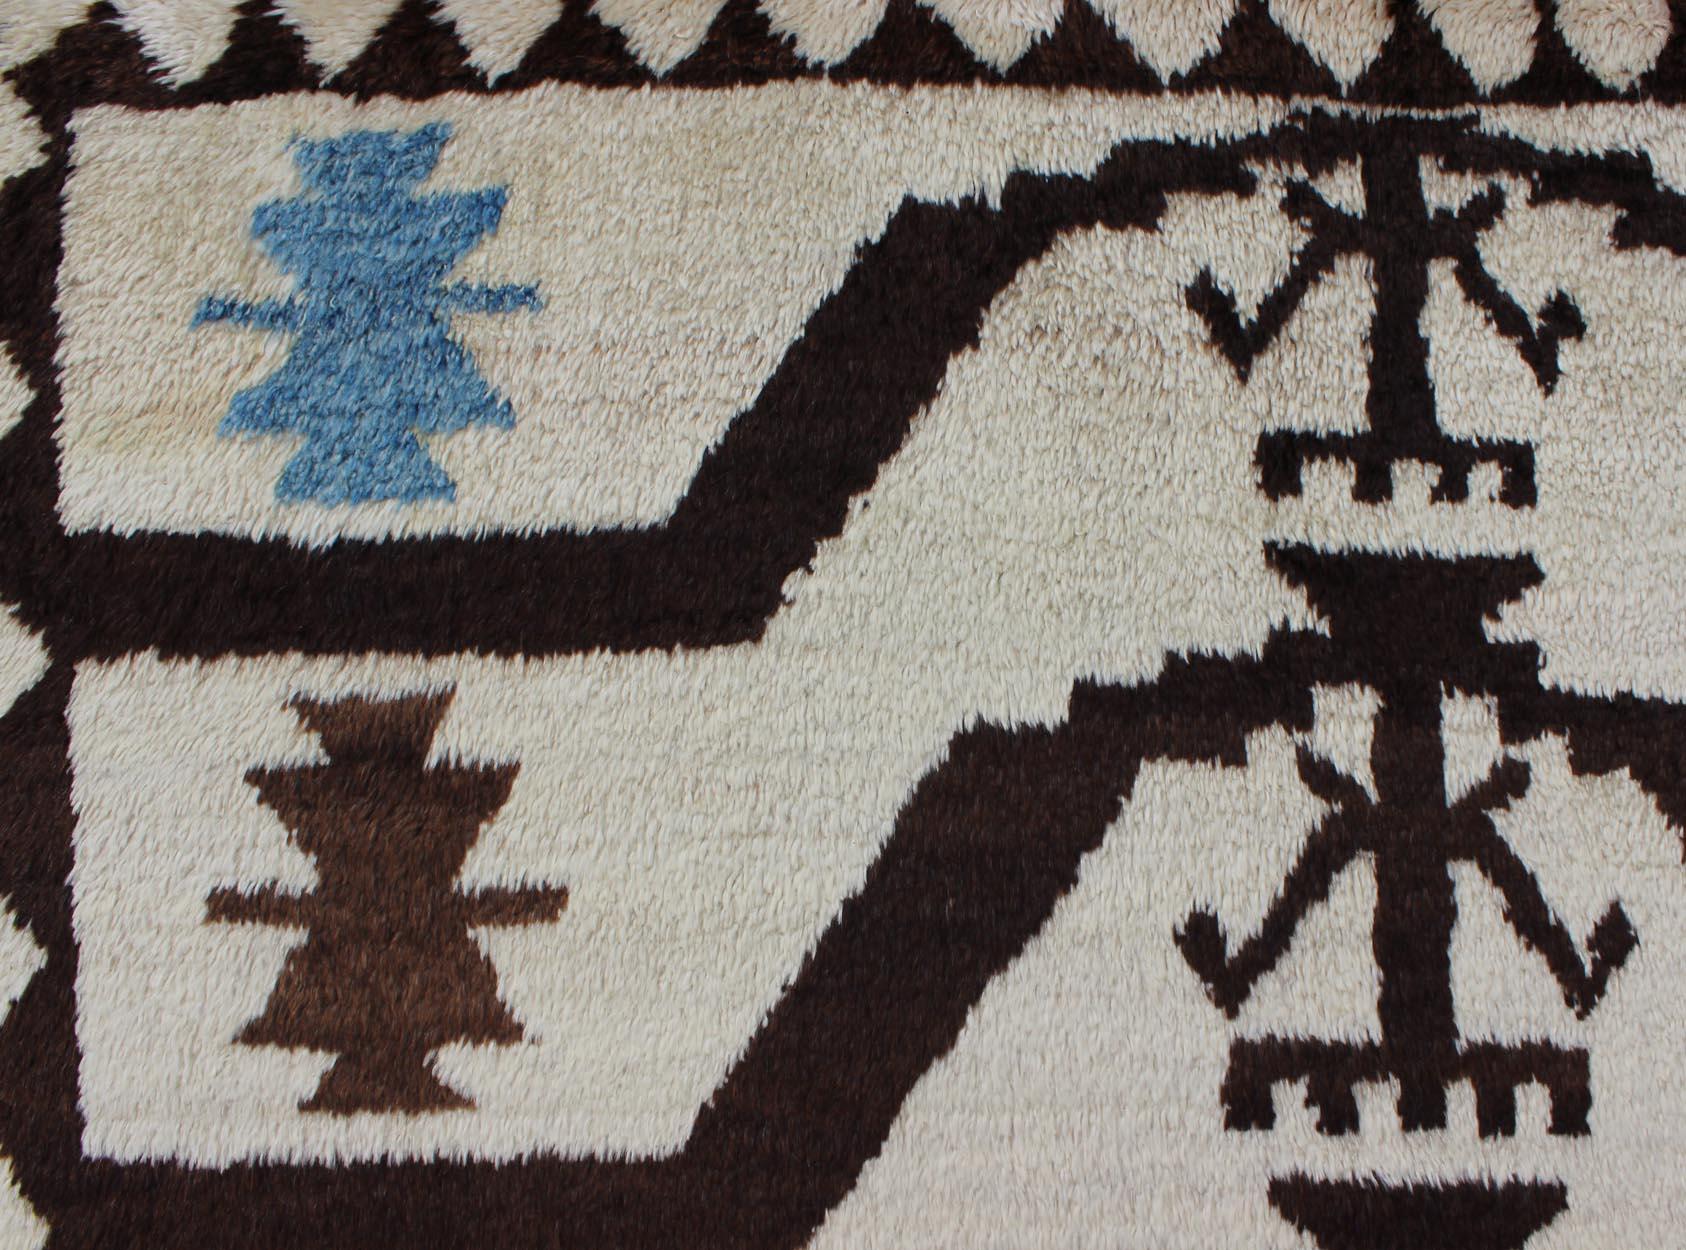 Turkish Tulu Carpet with Mid-Century Modern Design in Brown, Off-White and Blue For Sale 3